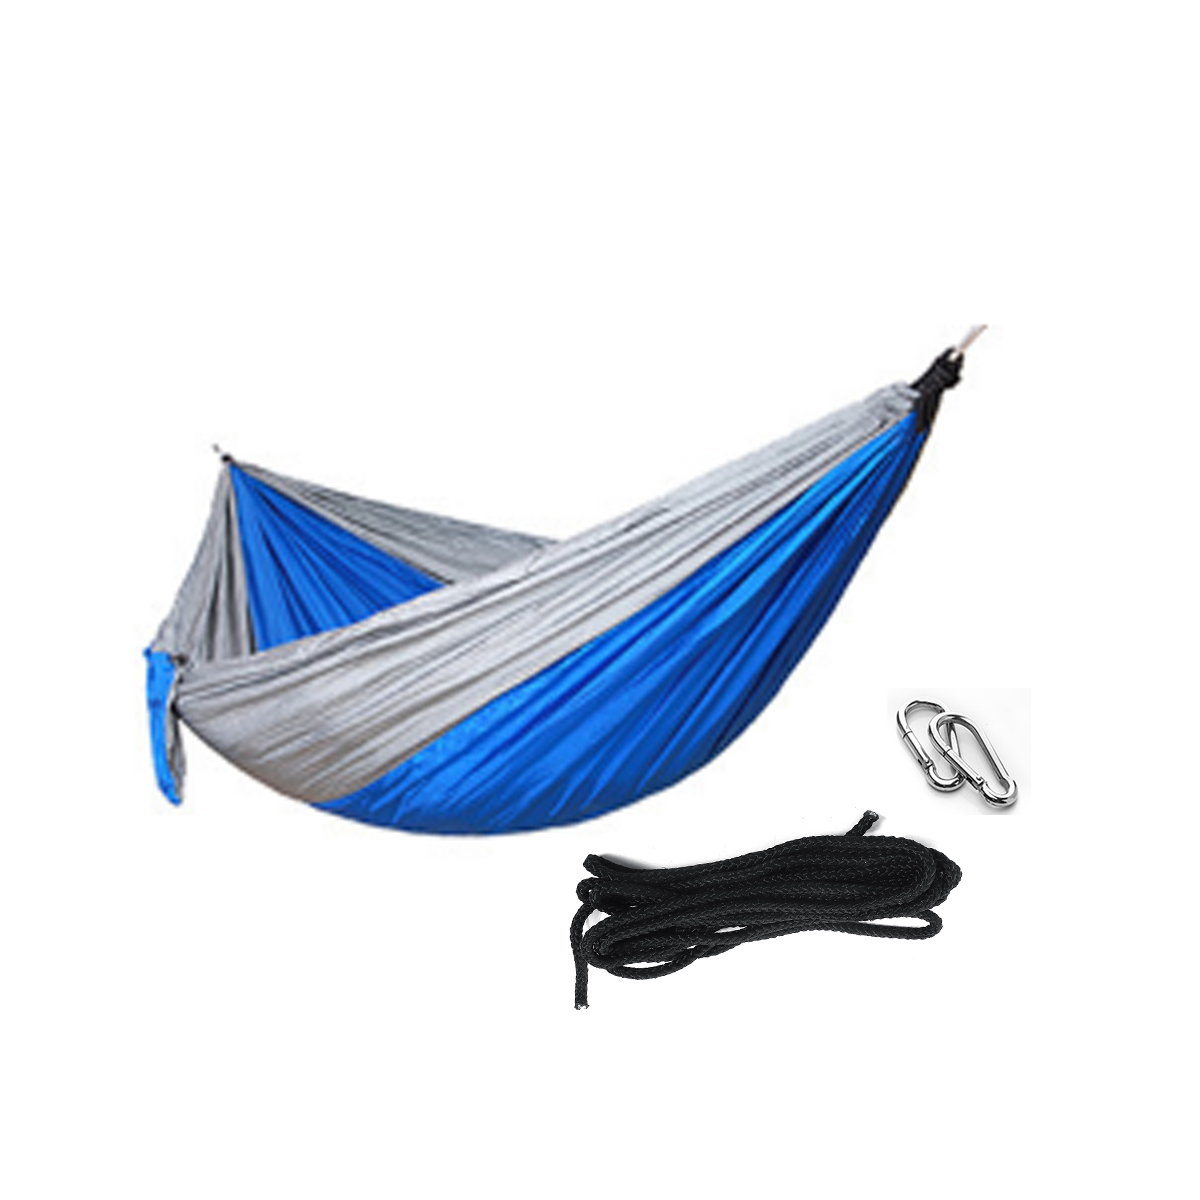 Outdoor-Travel-Double-Person-Hanging-Hammock-Max-Load-200KG-Portable-Camping-Hammock-Bed-1514882-8